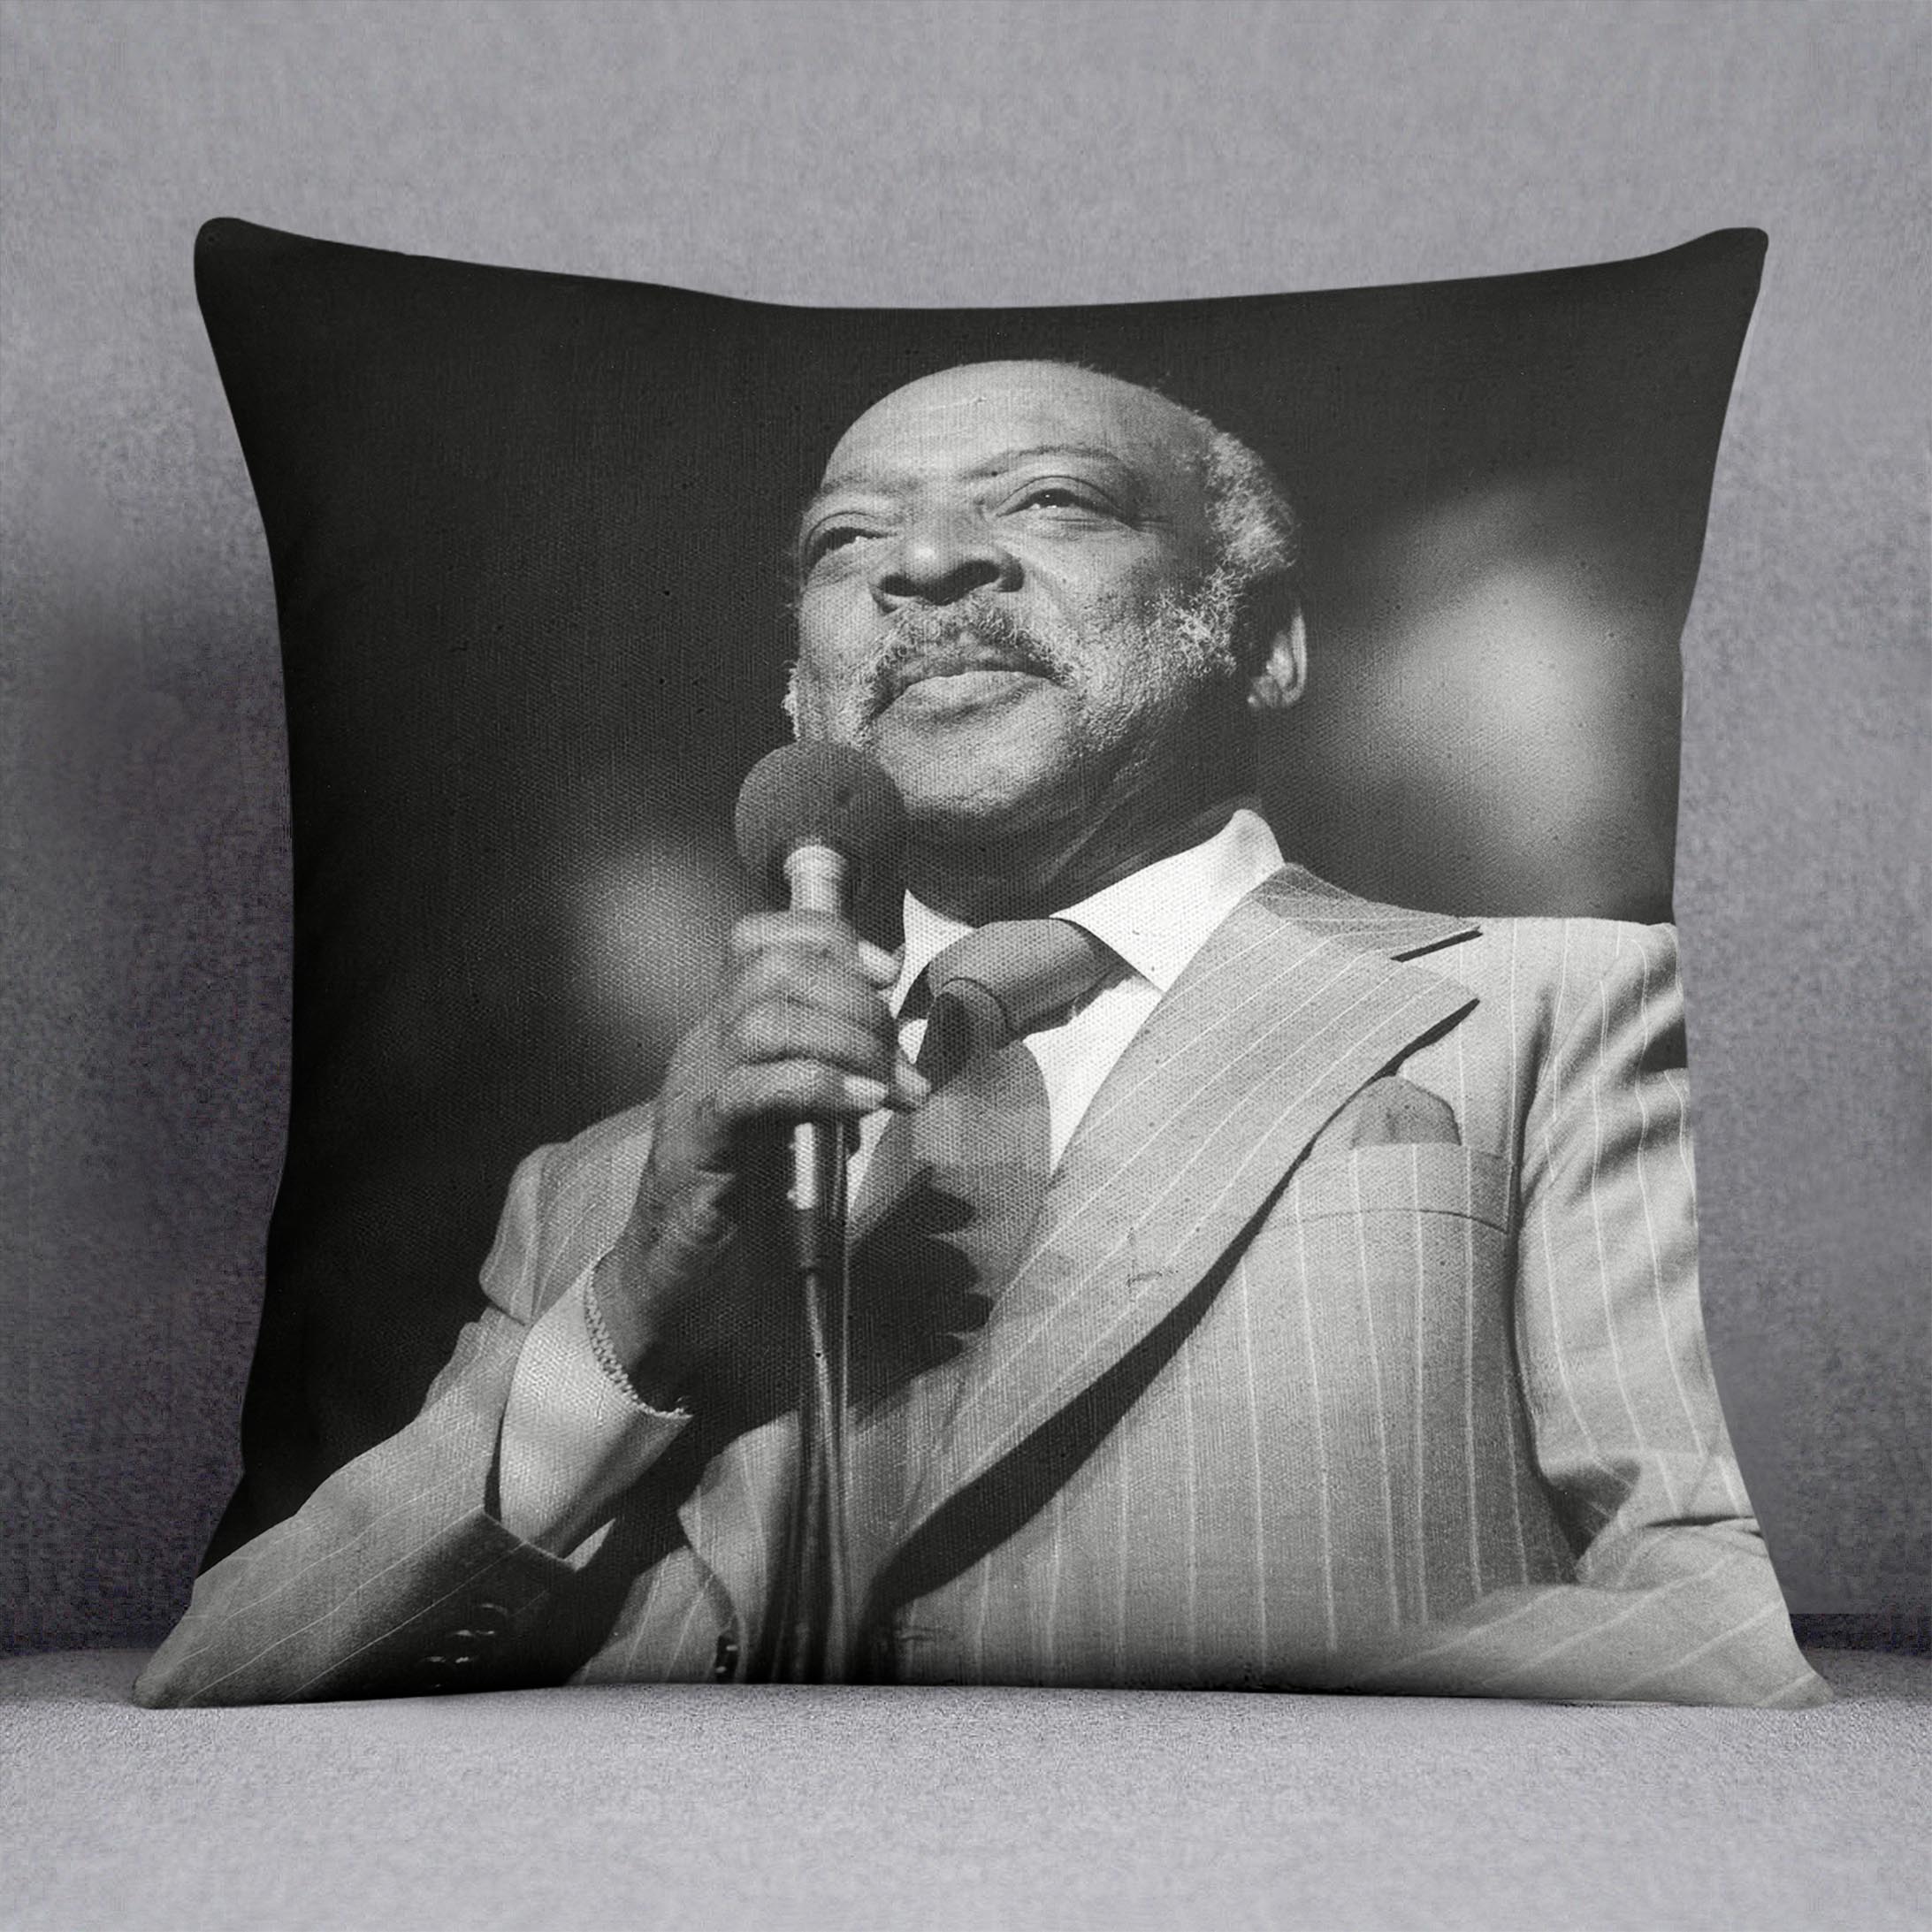 Count Basie performing Cushion